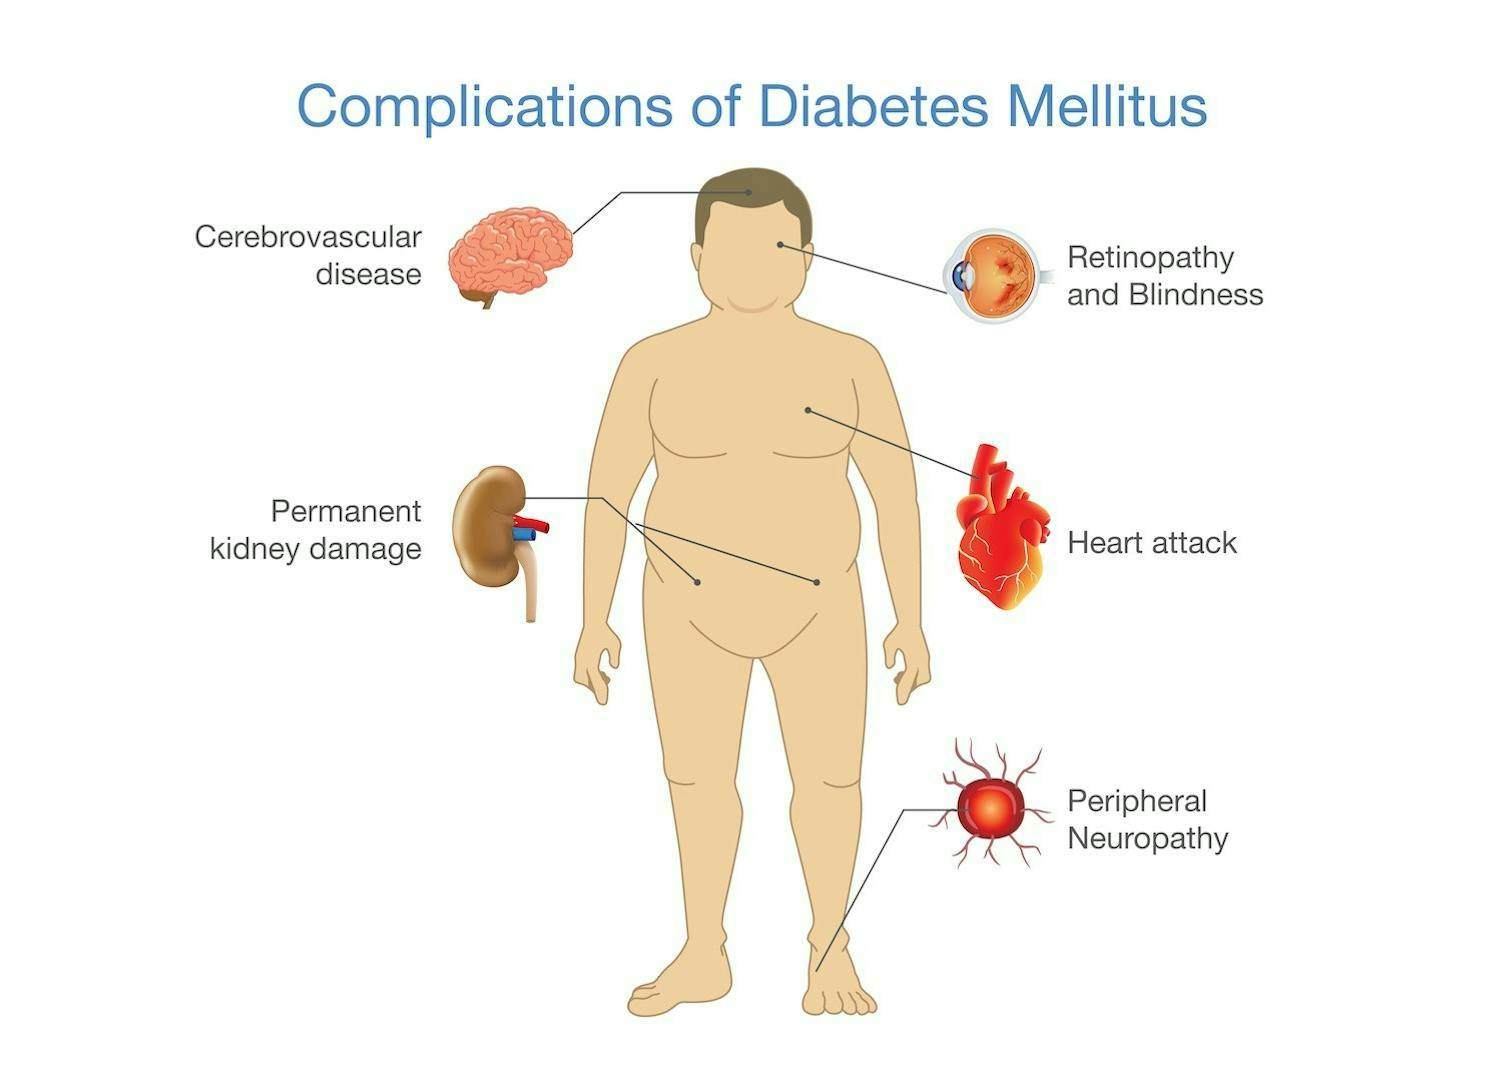 The complications of type 2 diabetes